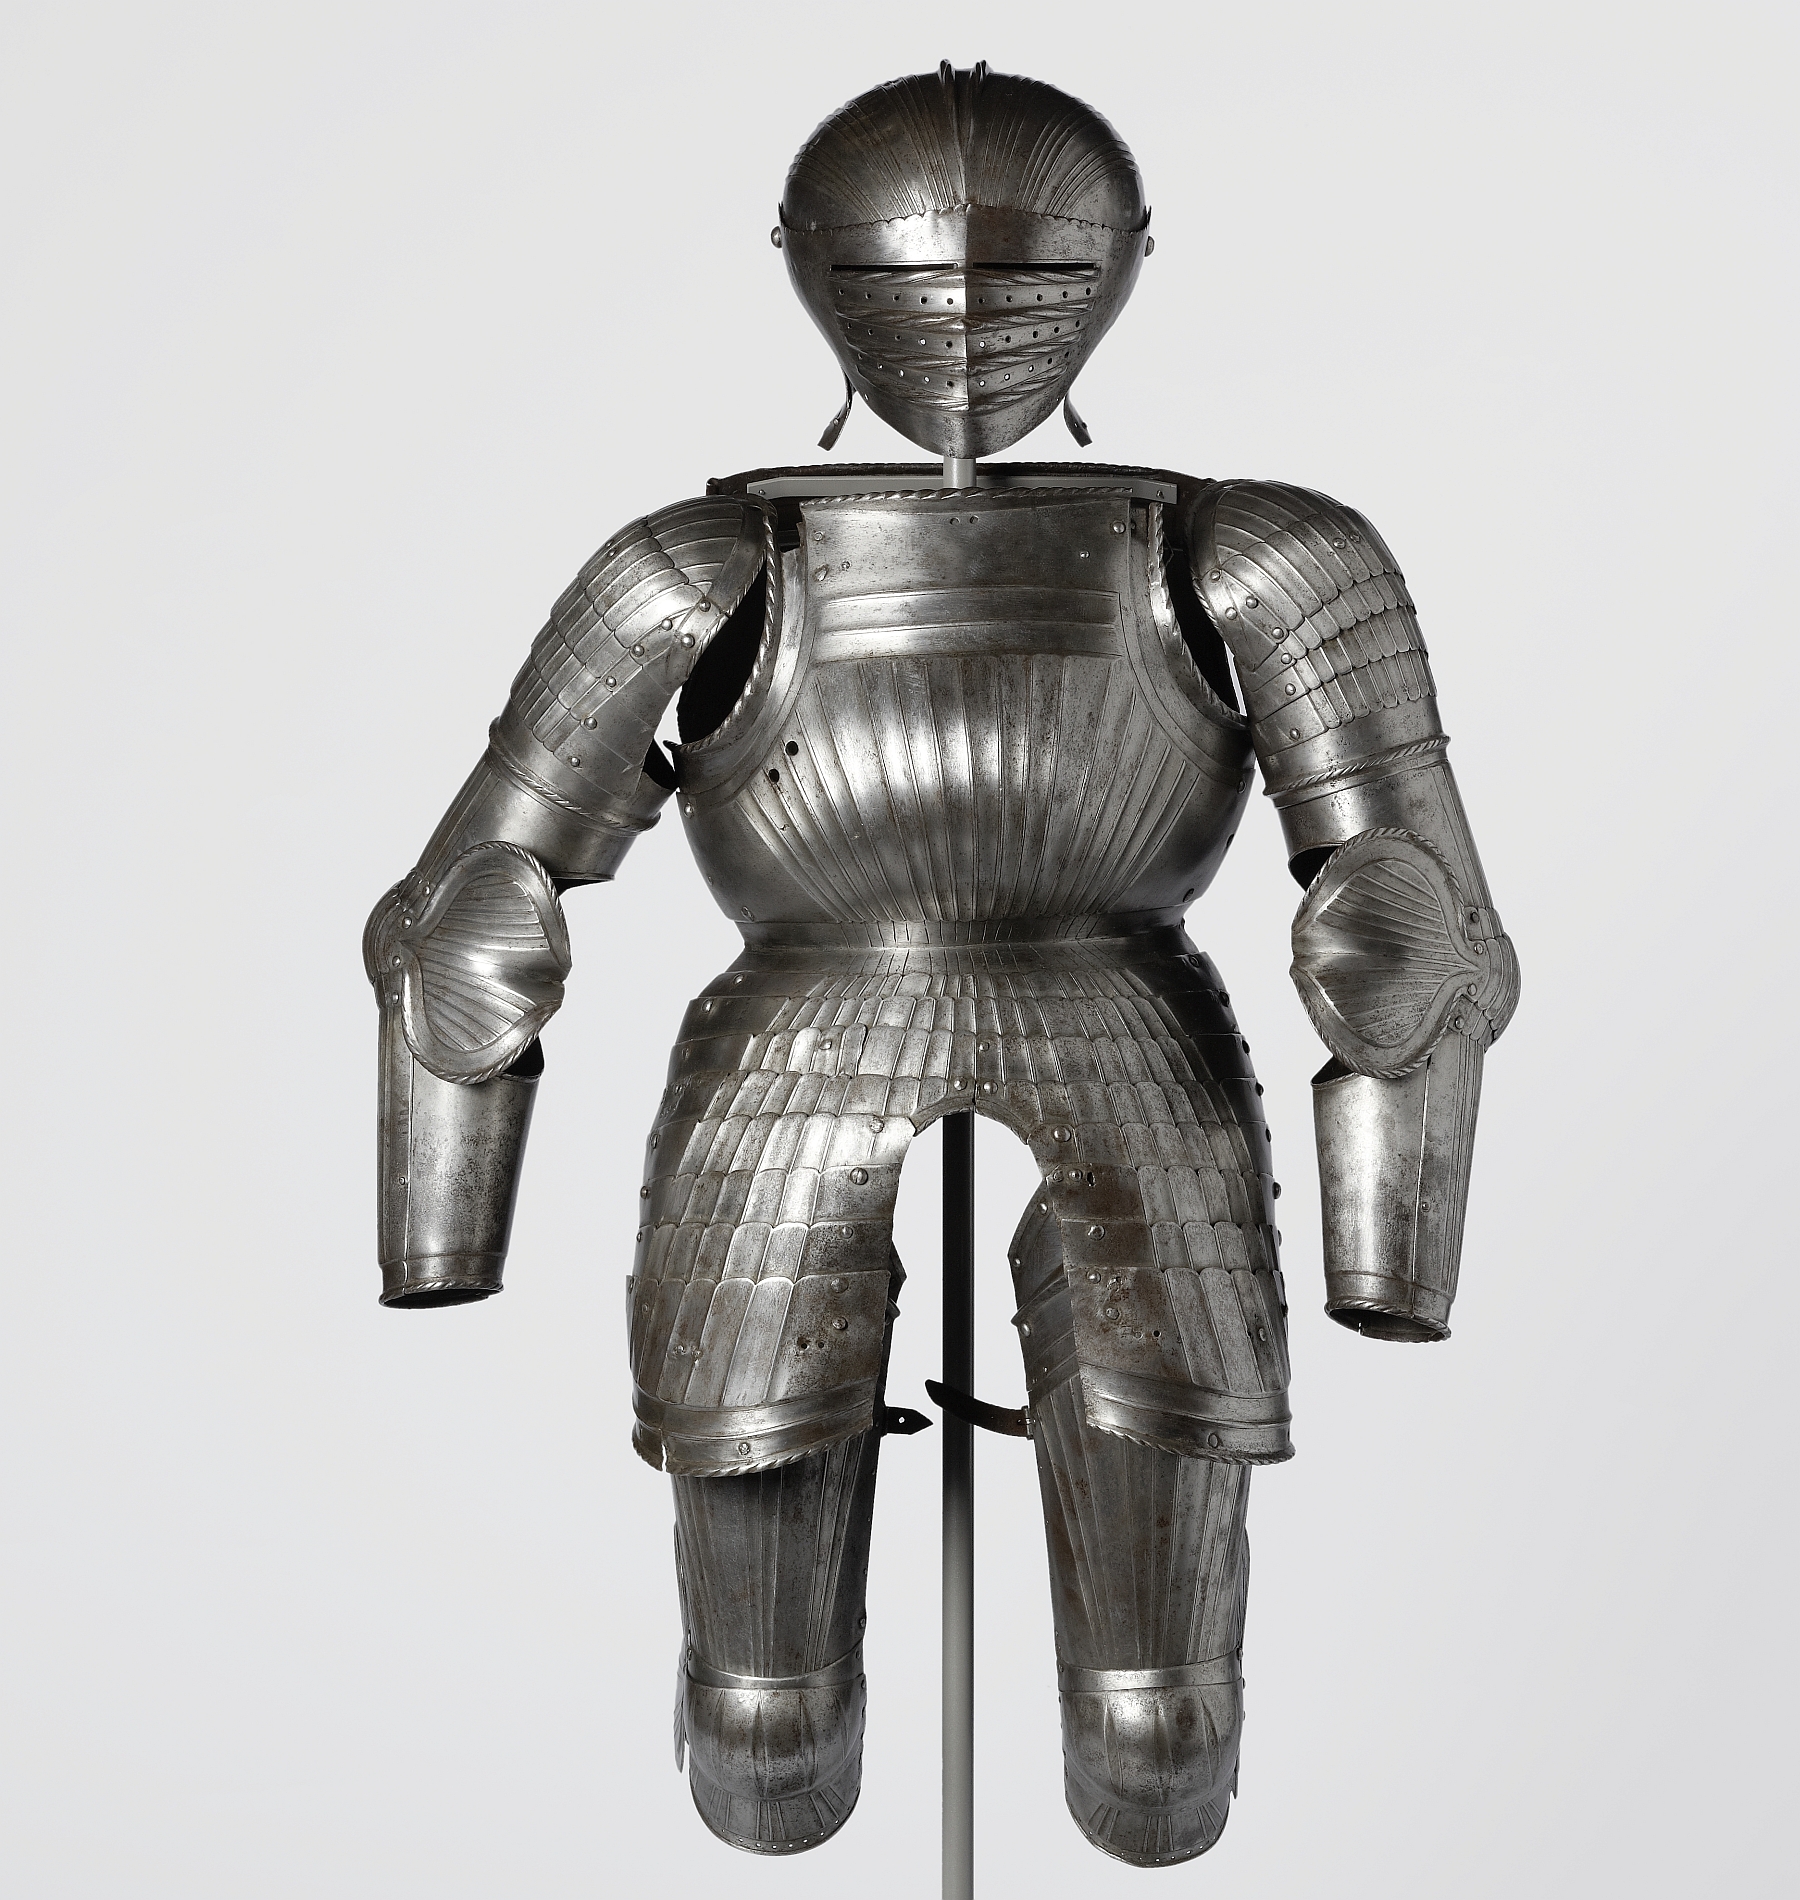 Battle armour: parts of polished, fluted “Maximilian-type” armour with visor helmet, 1st quarter 16th c., inv. no. WA 372